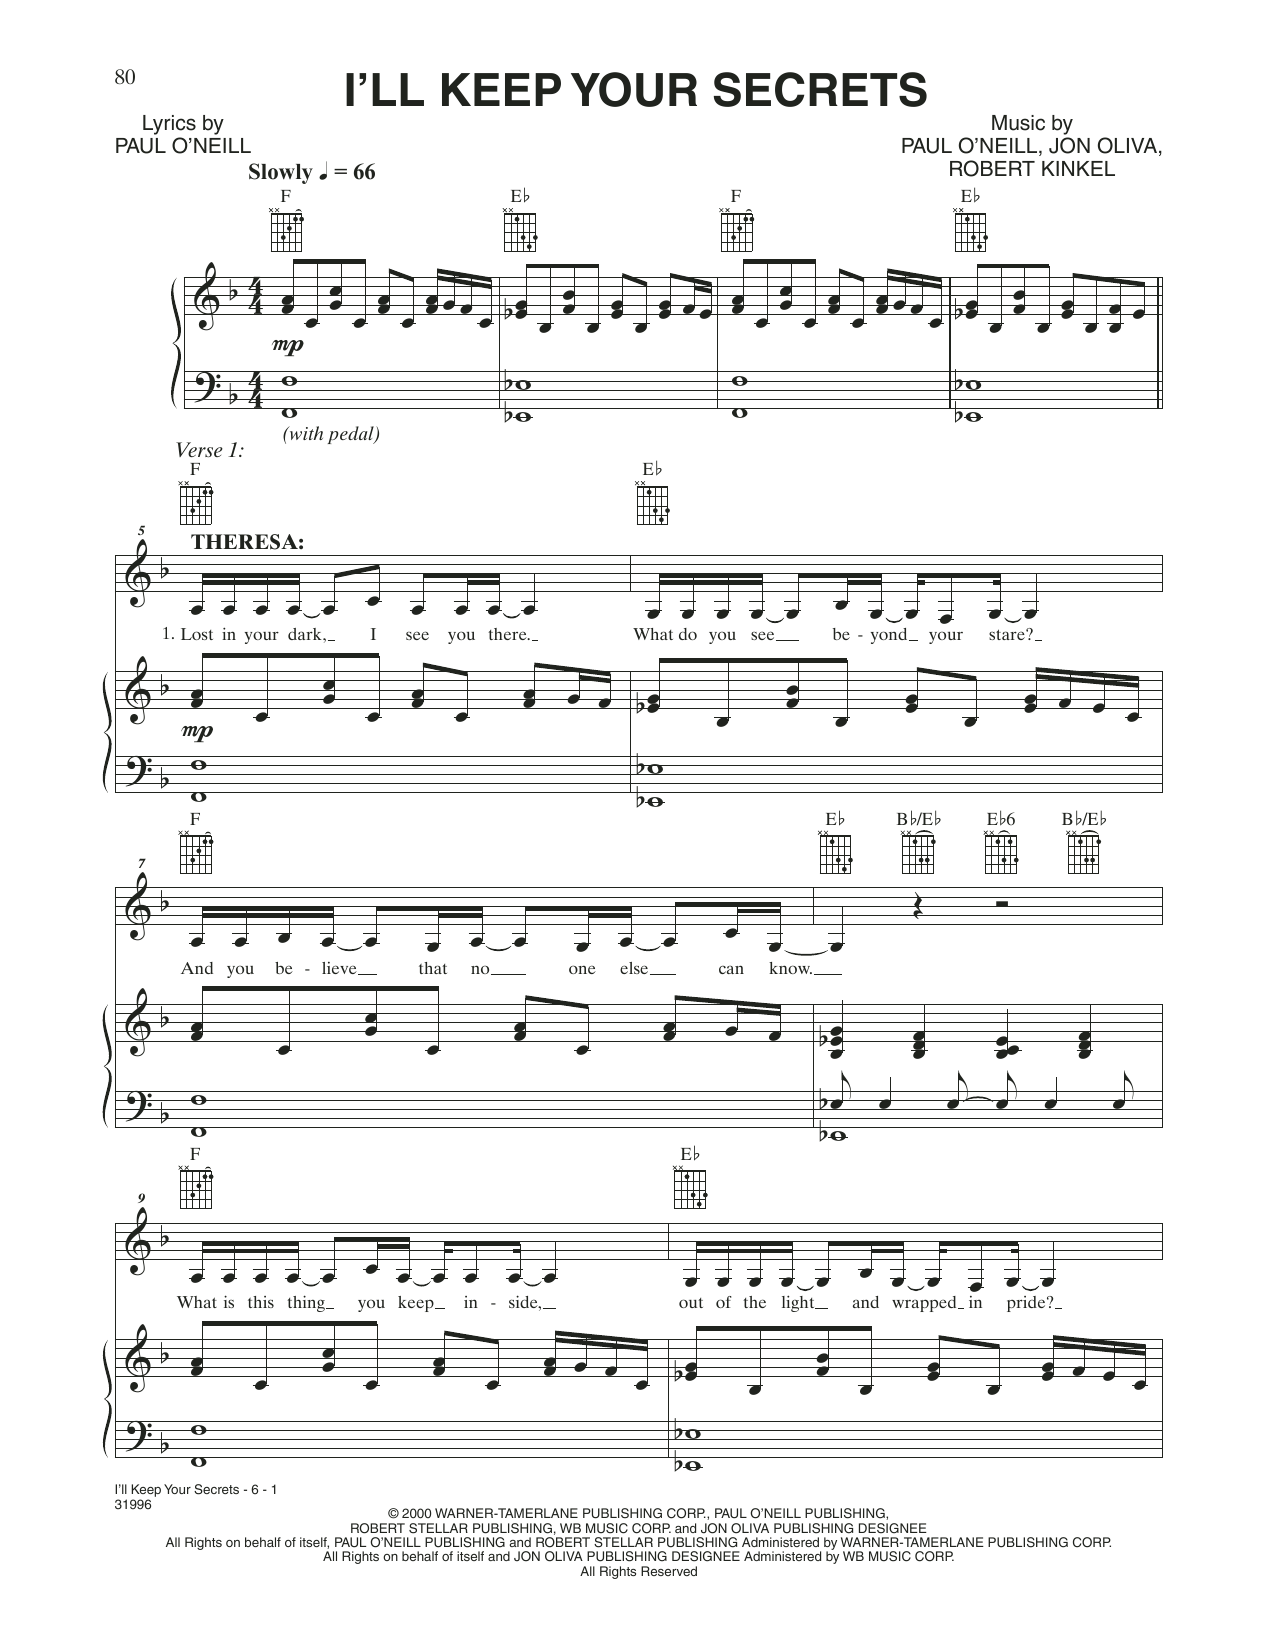 Download Trans-Siberian Orchestra I'll Keep Your Secrets Sheet Music